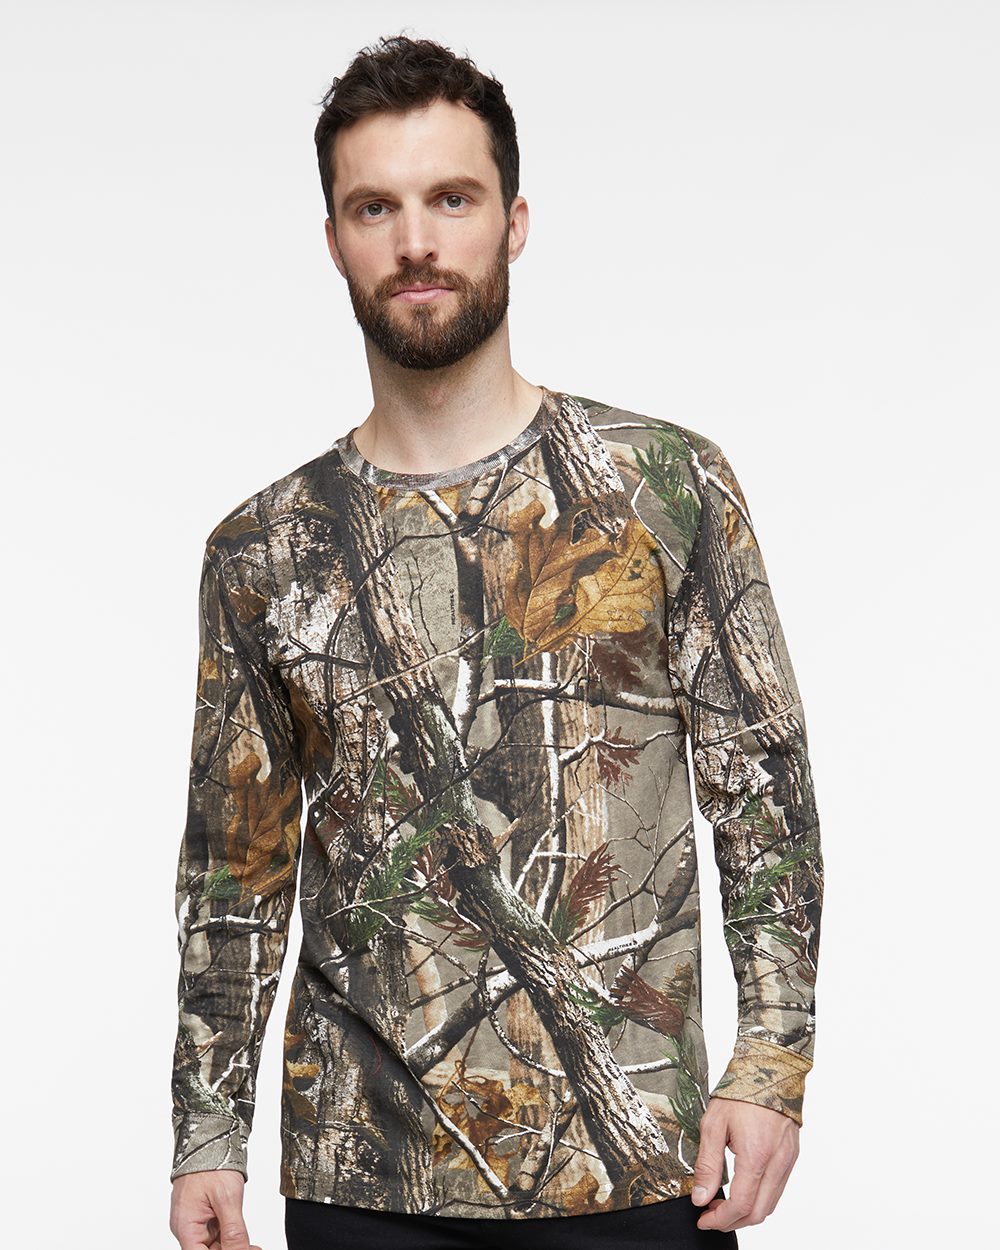 Charcoal Camouflage Crew Neck Pocket T-shirt